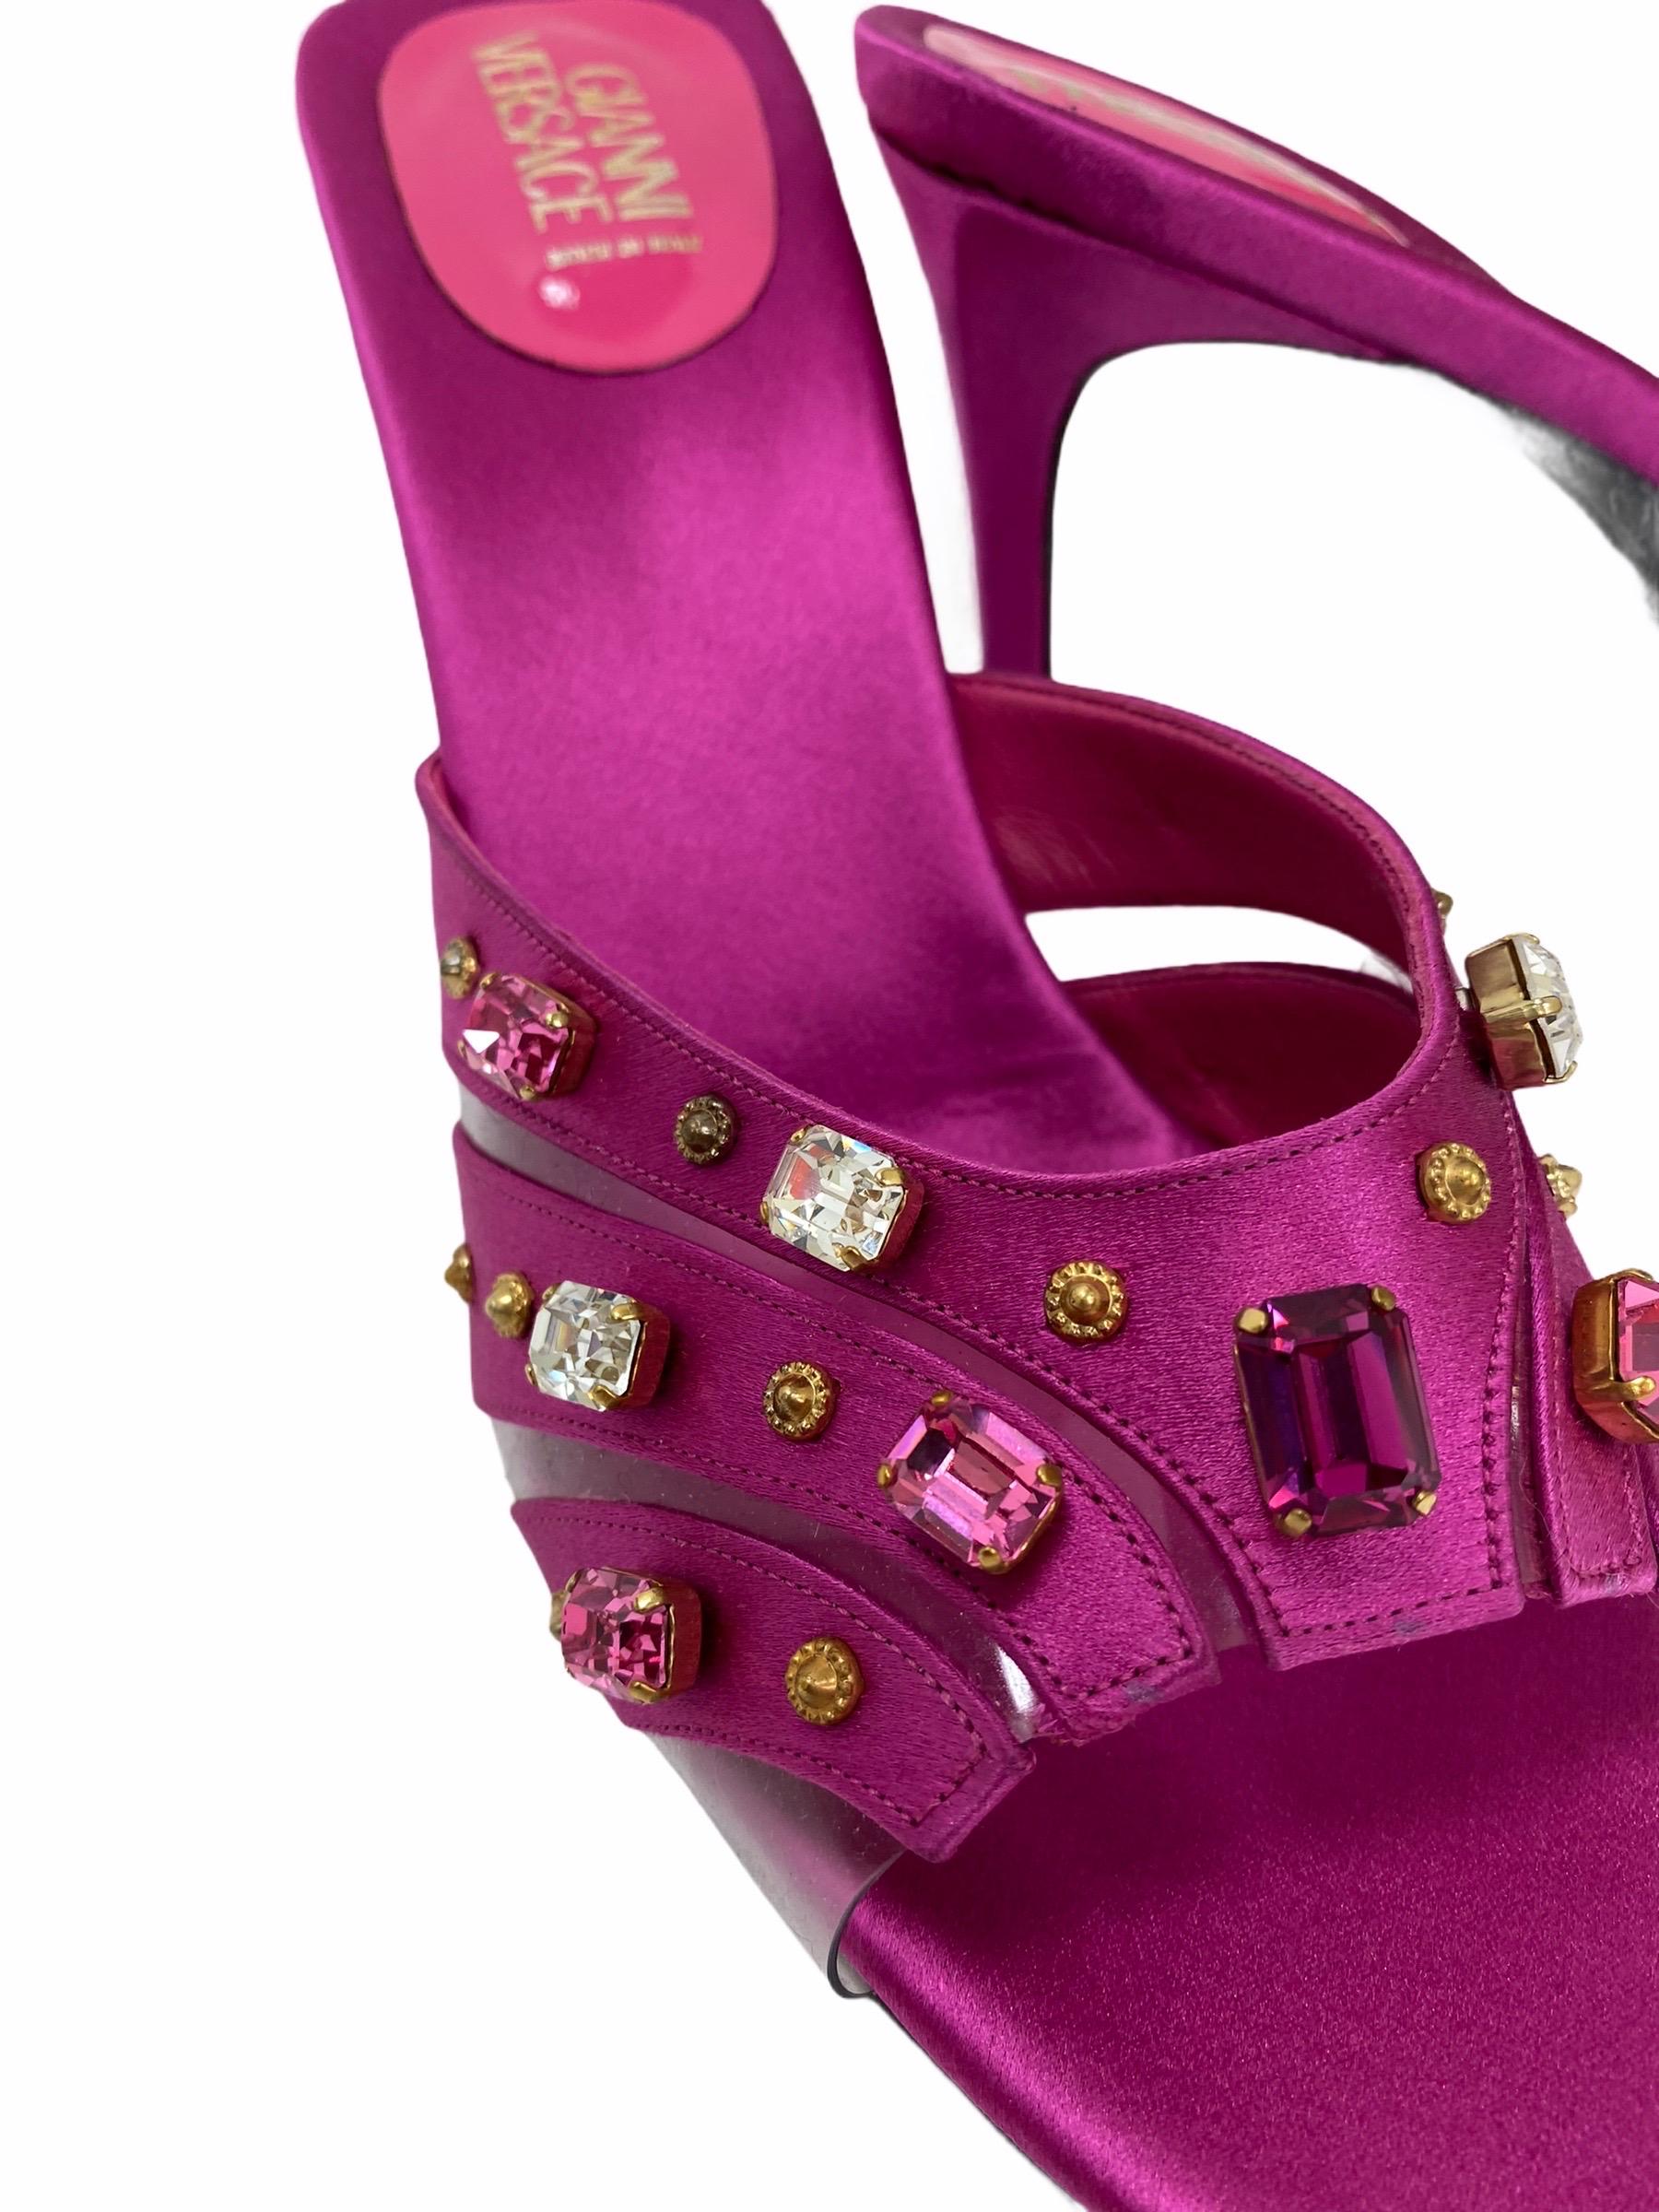 Women's S/S 2000 Vintage Gianni Versace Crystal Embellished Pink Sandals 39.5 – 9.5 NWT For Sale